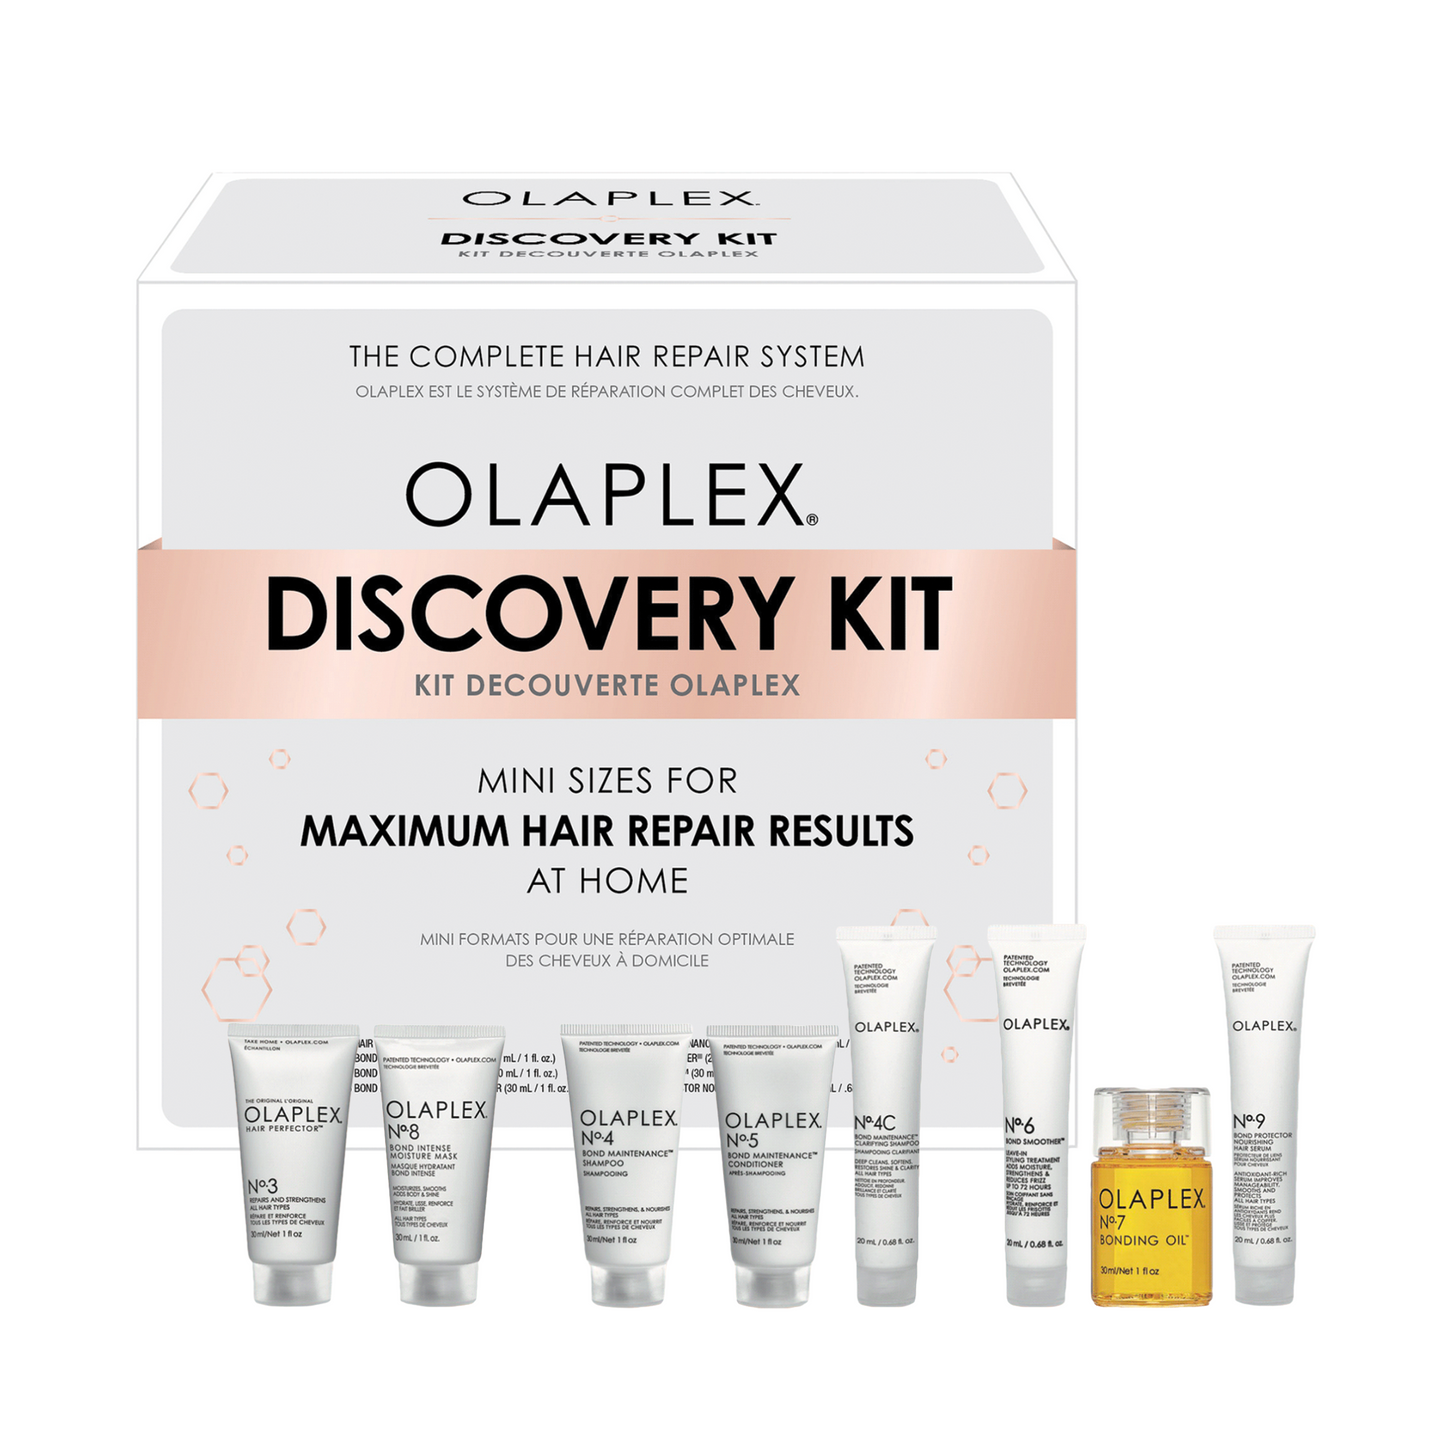 The perfect welcome to OLAPLEX for any hair type or an ideal travel set for devoted fans. Repair damage, cleanse, hydrate, style, and protect with OLAPLEX Bond Building Technology ™ in every step. Every hair type can look and feel softer, smoother, stronger, and healthier with more shine, body, and manageability.